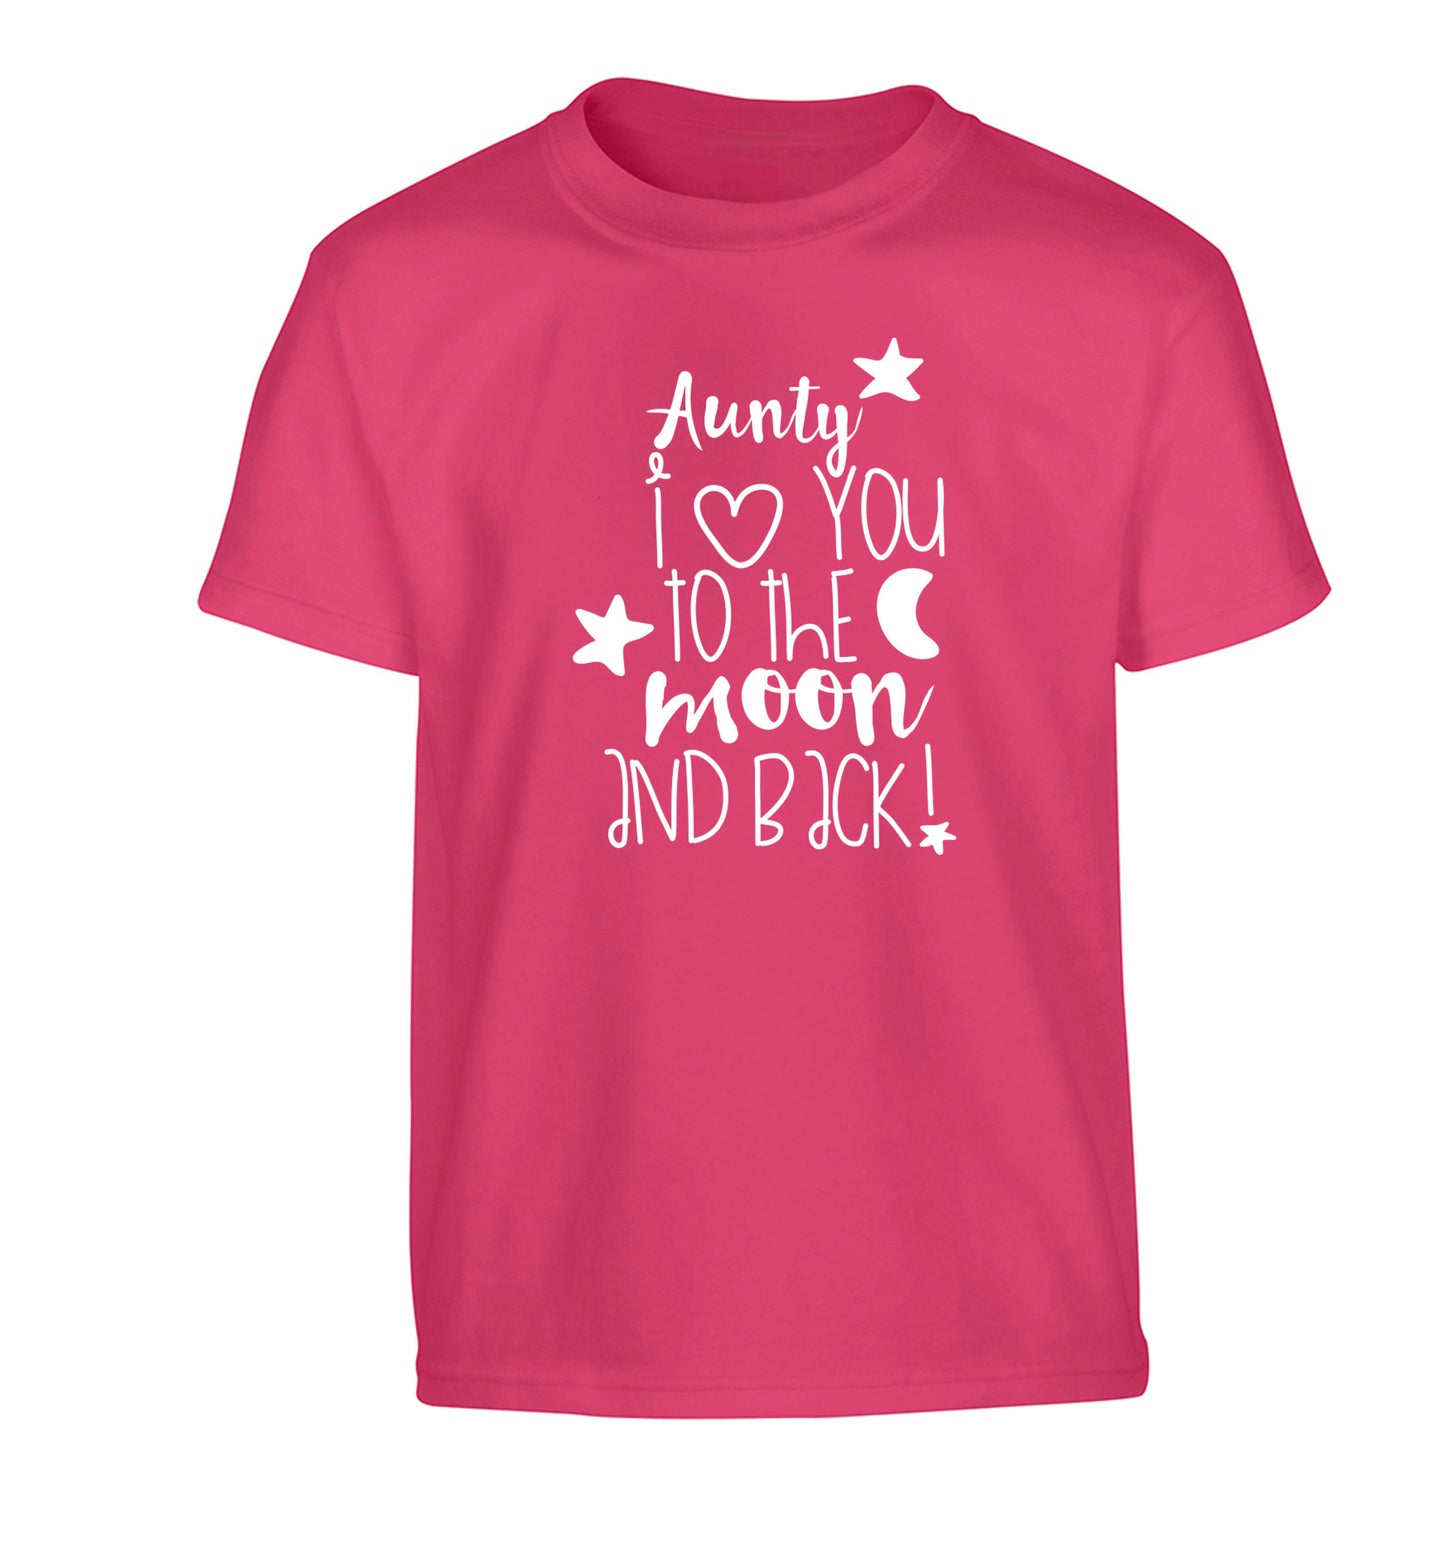 Aunty I love you to the moon and back Children's pink Tshirt 12-14 Years